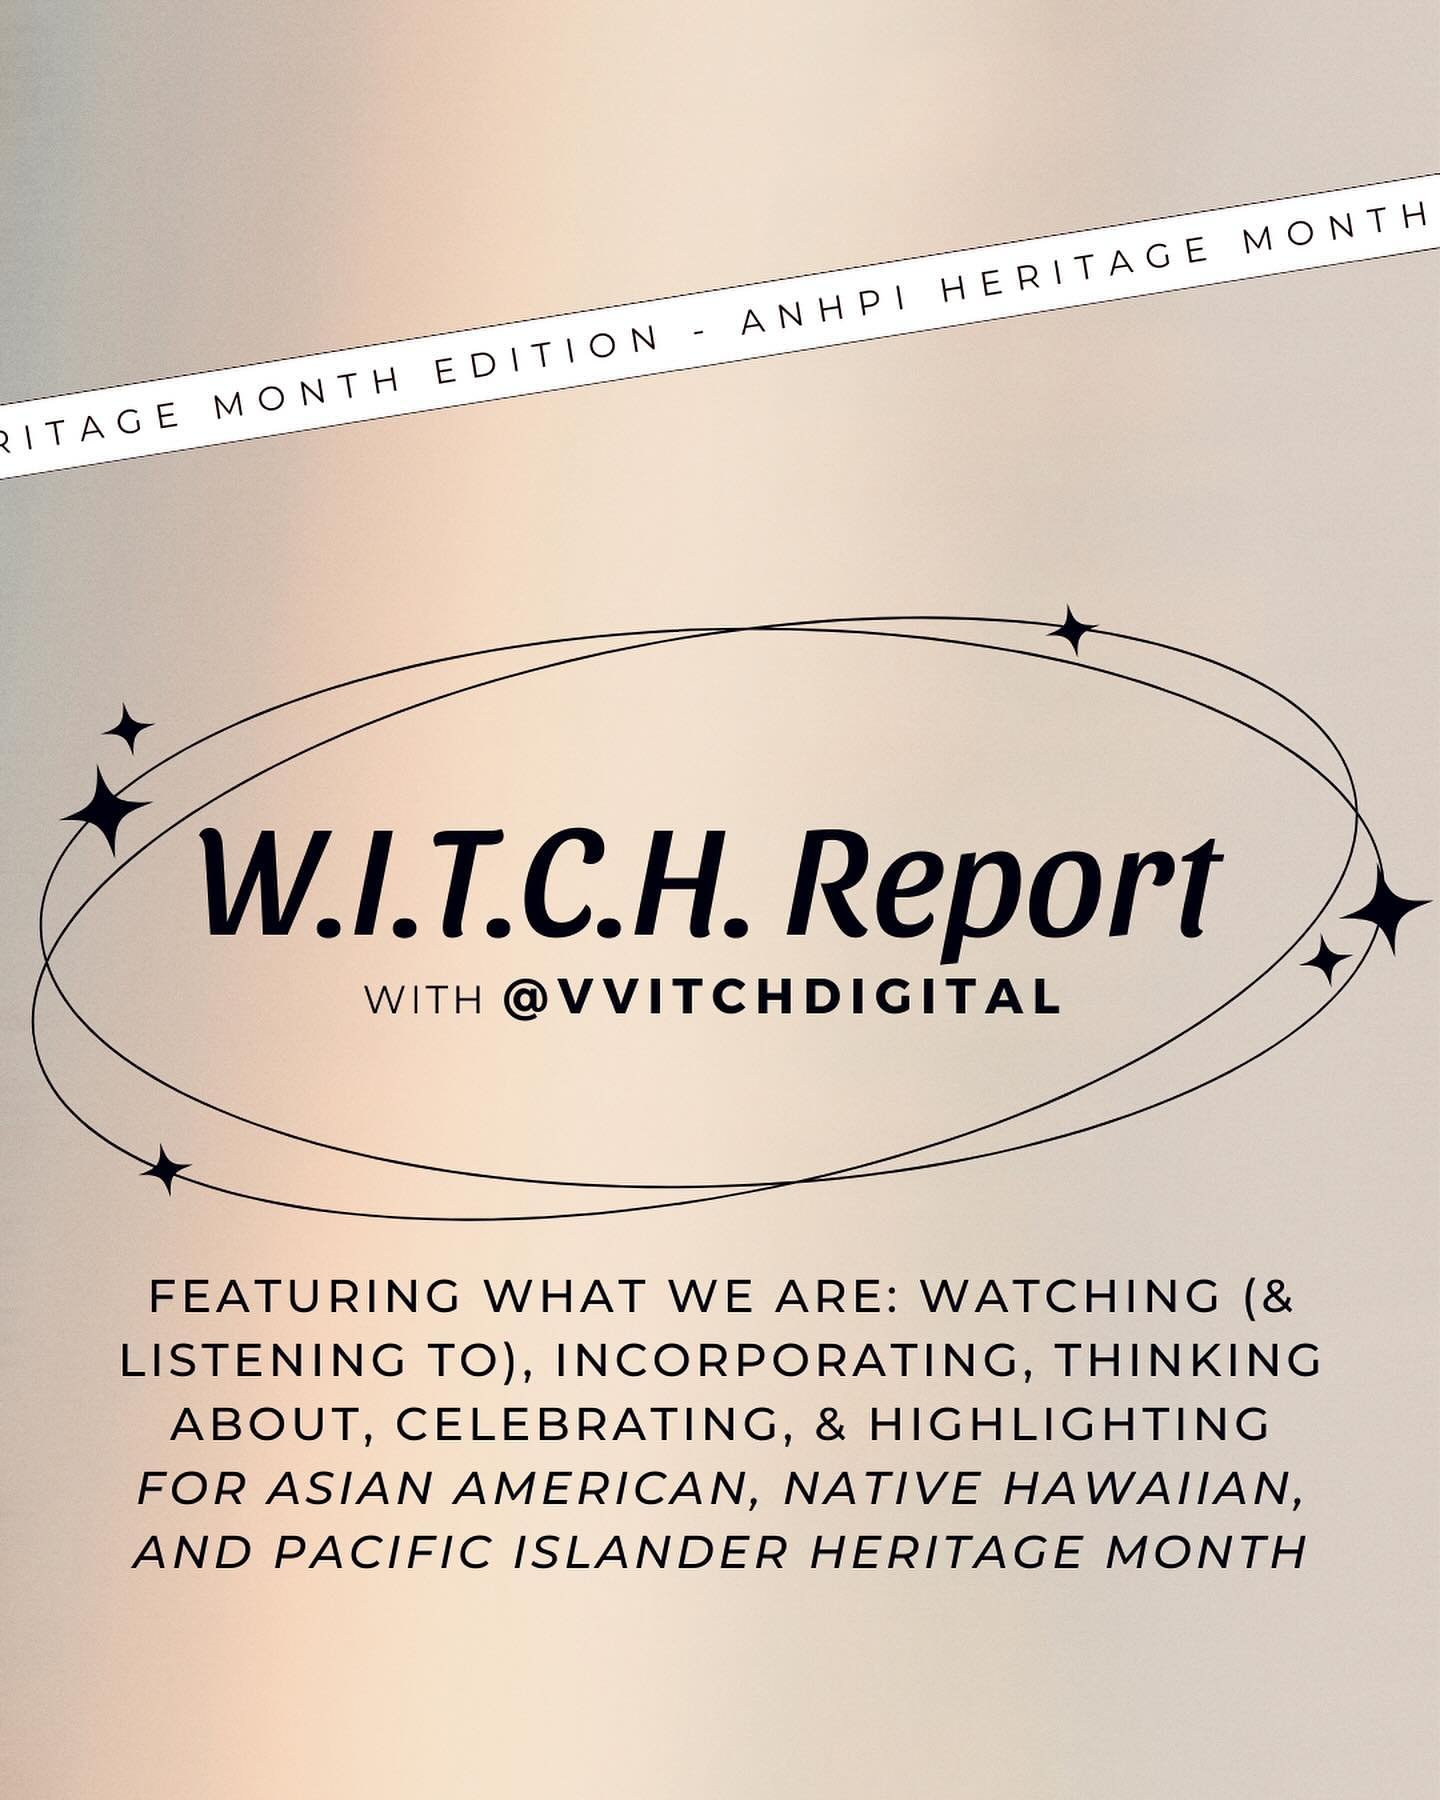 It&rsquo;s Asian American, Native Hawaiian, and Pacific Islander Heritage Month and to celebrate, here is our monthly VVITCH Report #ANHPI Edition featuring what we are Watching, Incorporating, Thinking About, Celebrating, and Highlighting.

Folks an